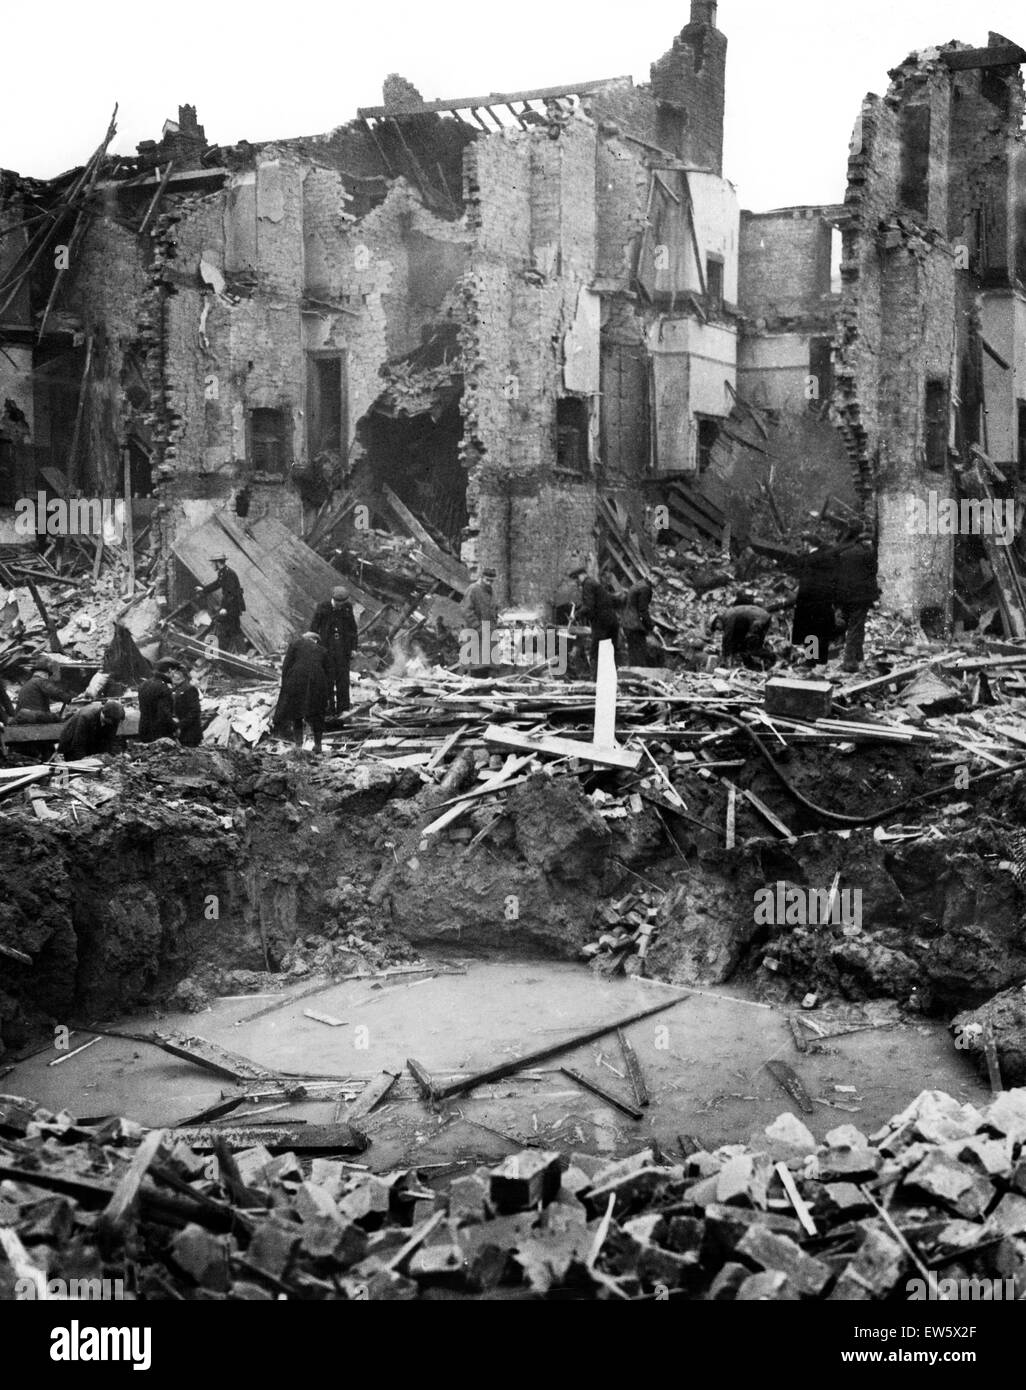 The Nazis indiscriminate bombing results in damage being done to dwelling houses in a recent raid on Virgil Street, Liverpool, Merseyside. 11th January 1941. Stock Photo